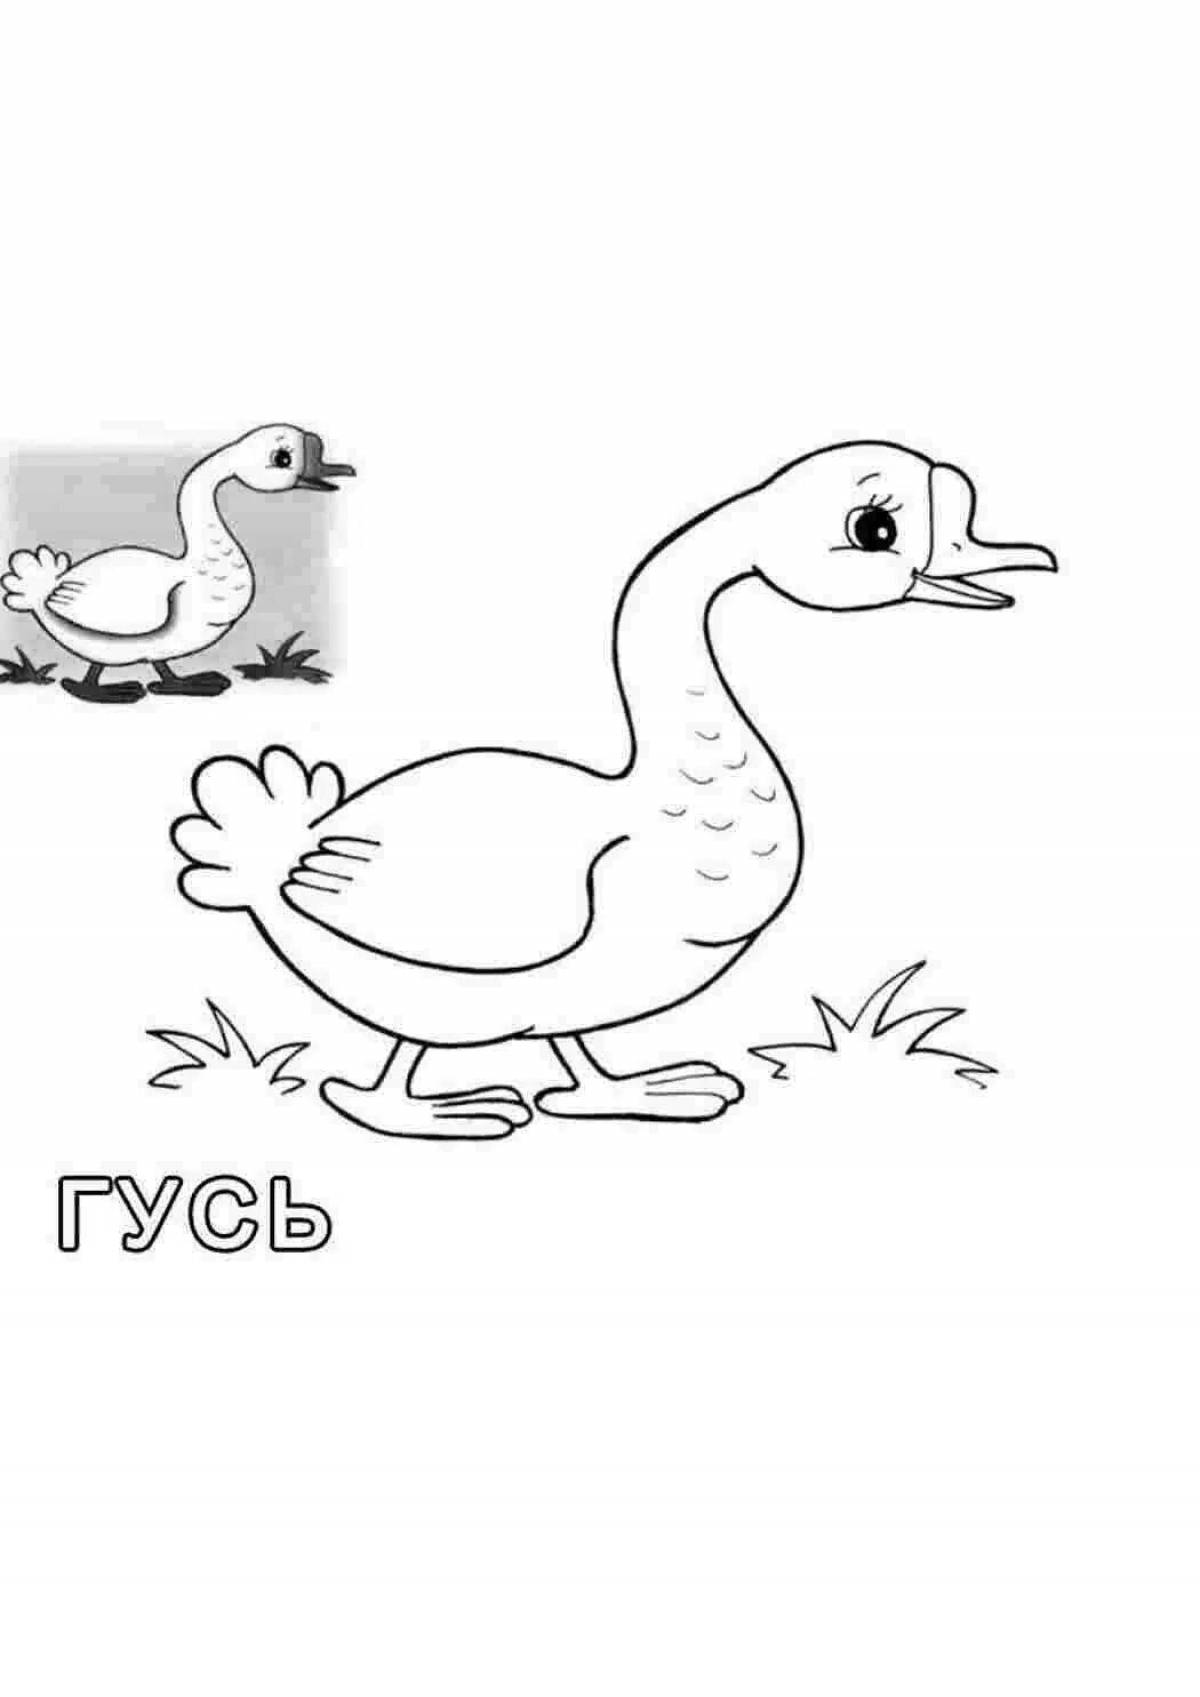 Adorable poultry coloring page